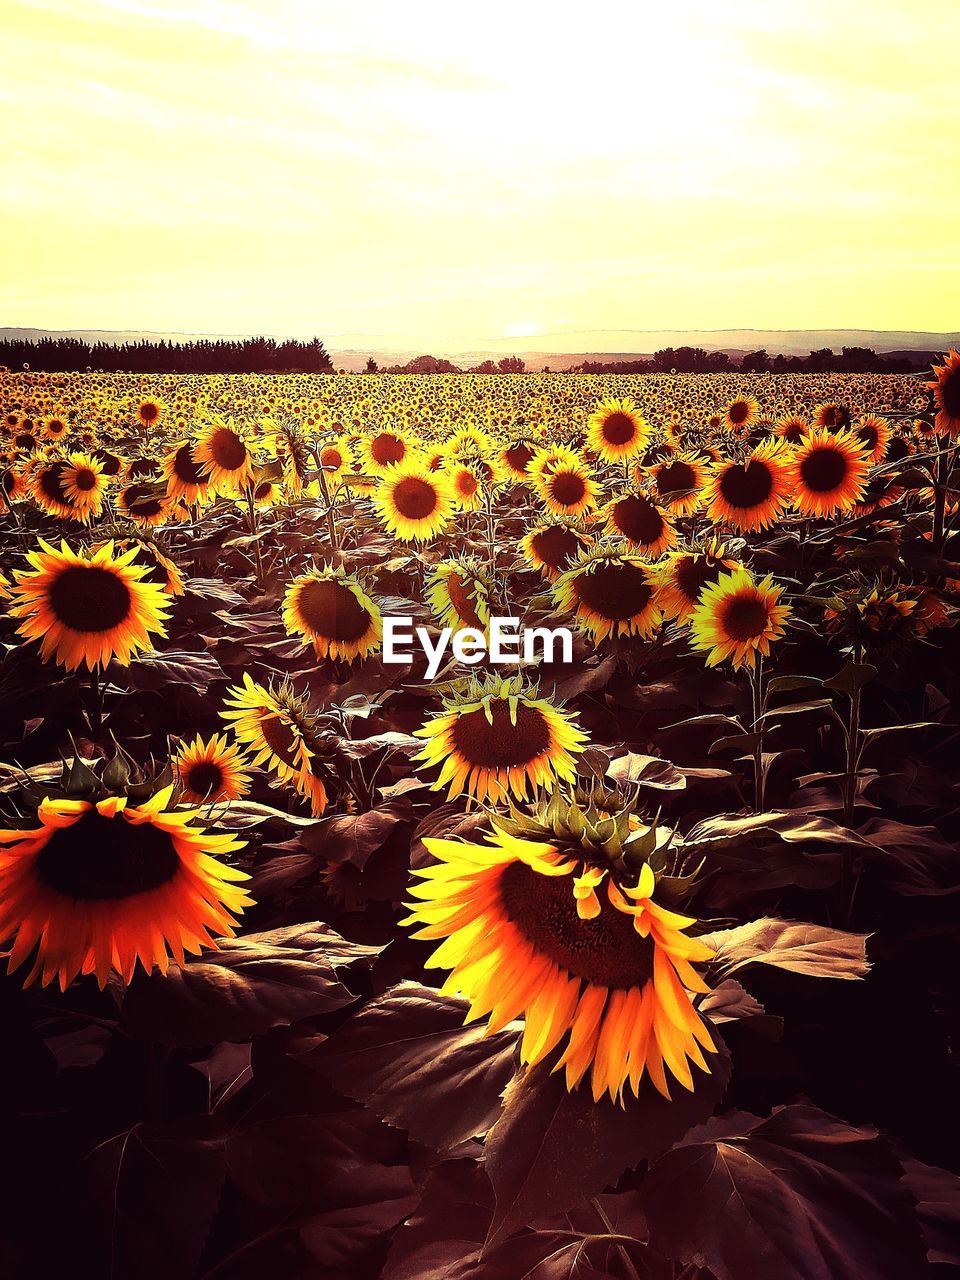 sunflower, plant, flower, beauty in nature, flowering plant, nature, sky, growth, flower head, land, yellow, freshness, fragility, field, landscape, inflorescence, no people, petal, environment, scenics - nature, sunset, tranquility, cloud, sunlight, agriculture, rural scene, outdoors, tranquil scene, close-up, horizon, day, orange color, horizon over land, pollen